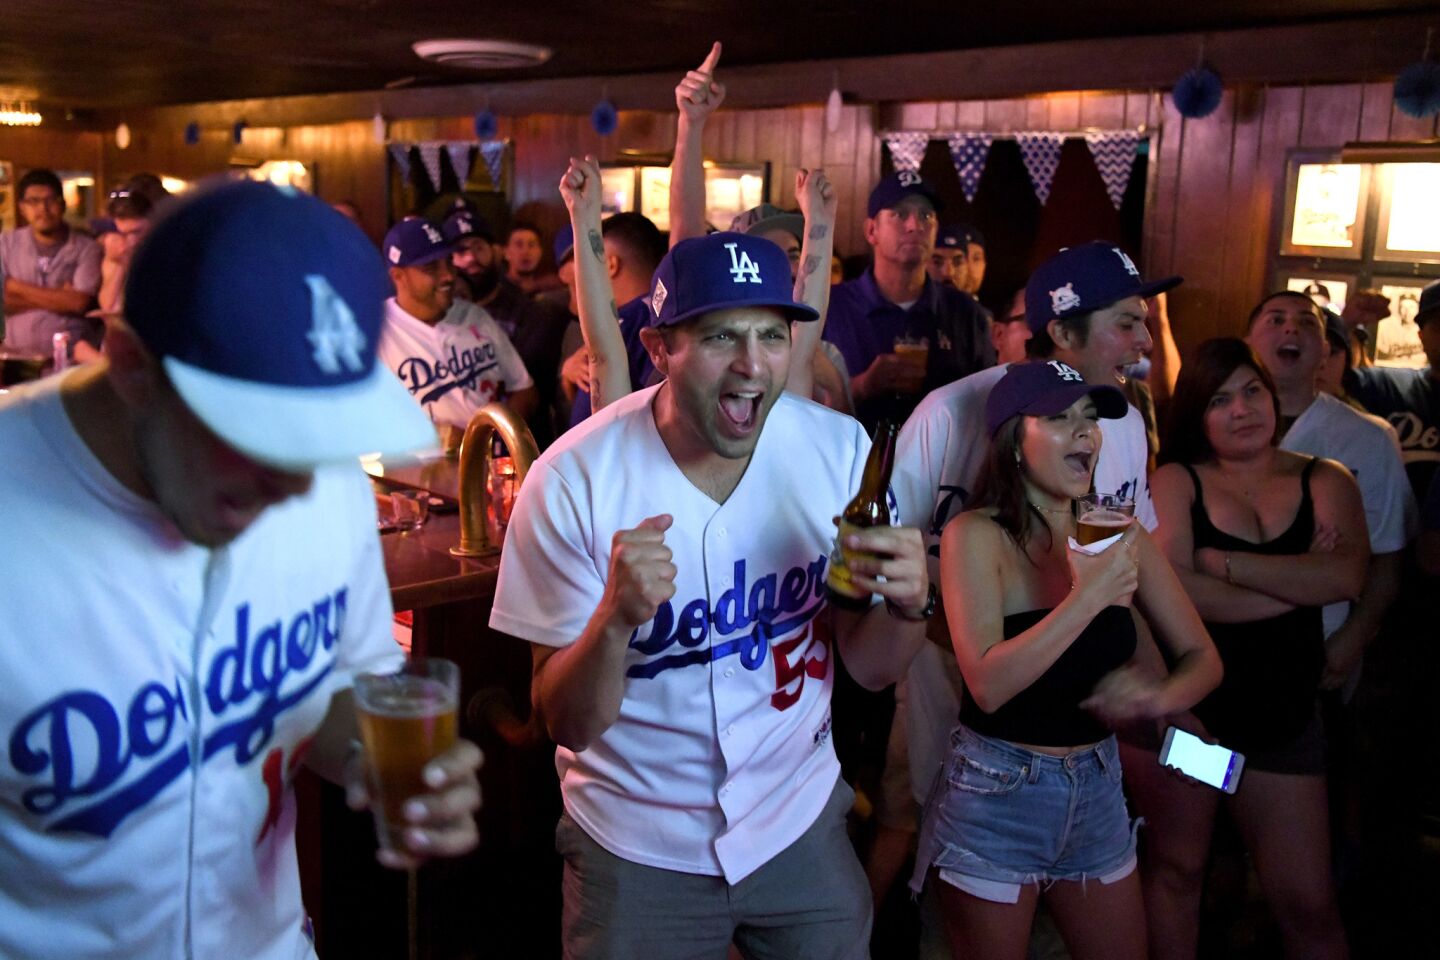 Andrew Vialpando, center, cheers with other Dodgers fans while watching the World Series at The Short Stop in Echo Park.